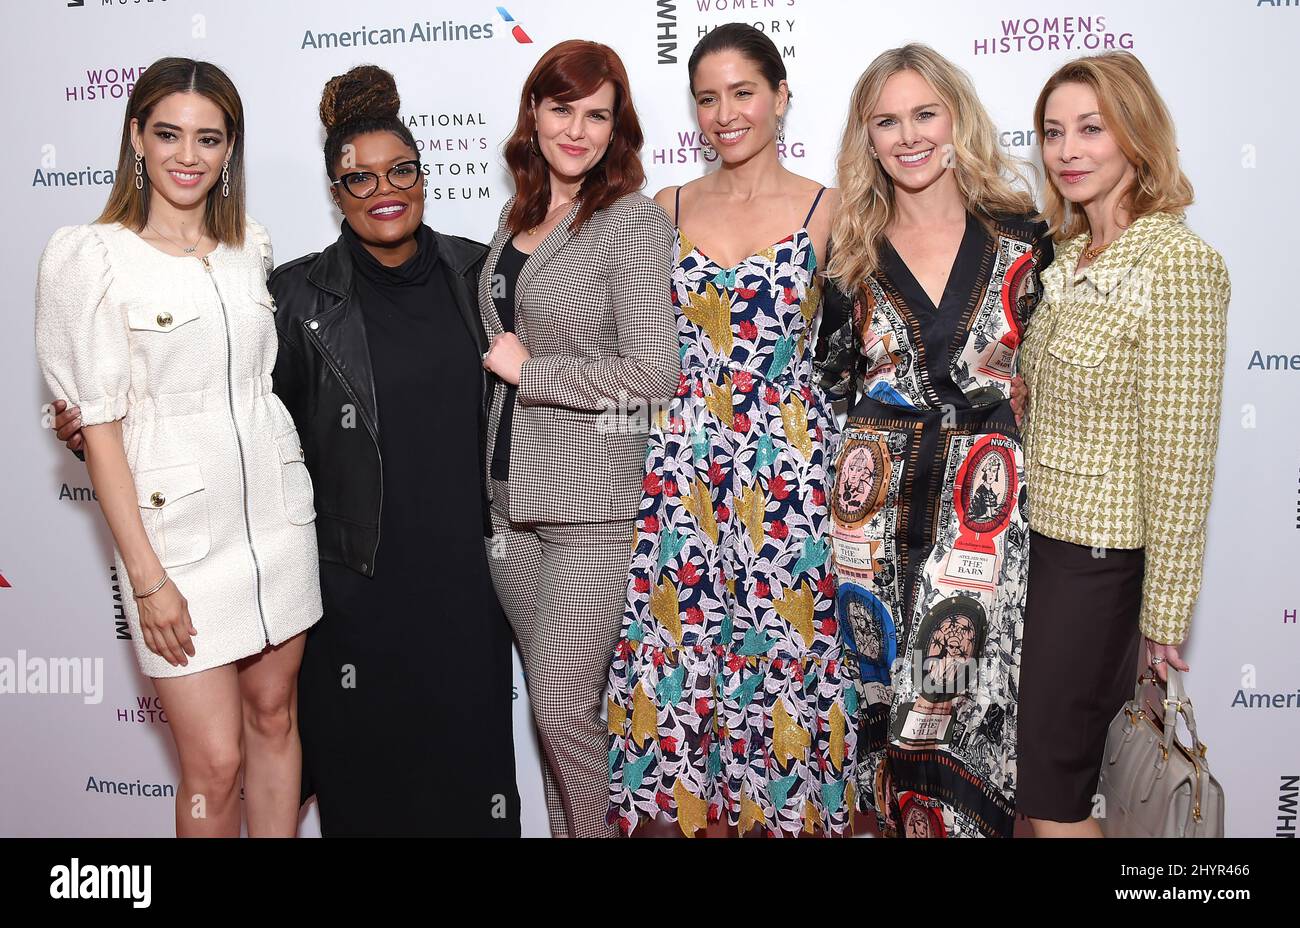 Edy Ganem,Yvette Nicole Brown, Sara Rue, Mereceds Mason, Laura B attends the The National Women's History Museum Eighth Annual Women Making History Awards held in Los Angeles, USA on Sunday March , 2020. Stock Photo